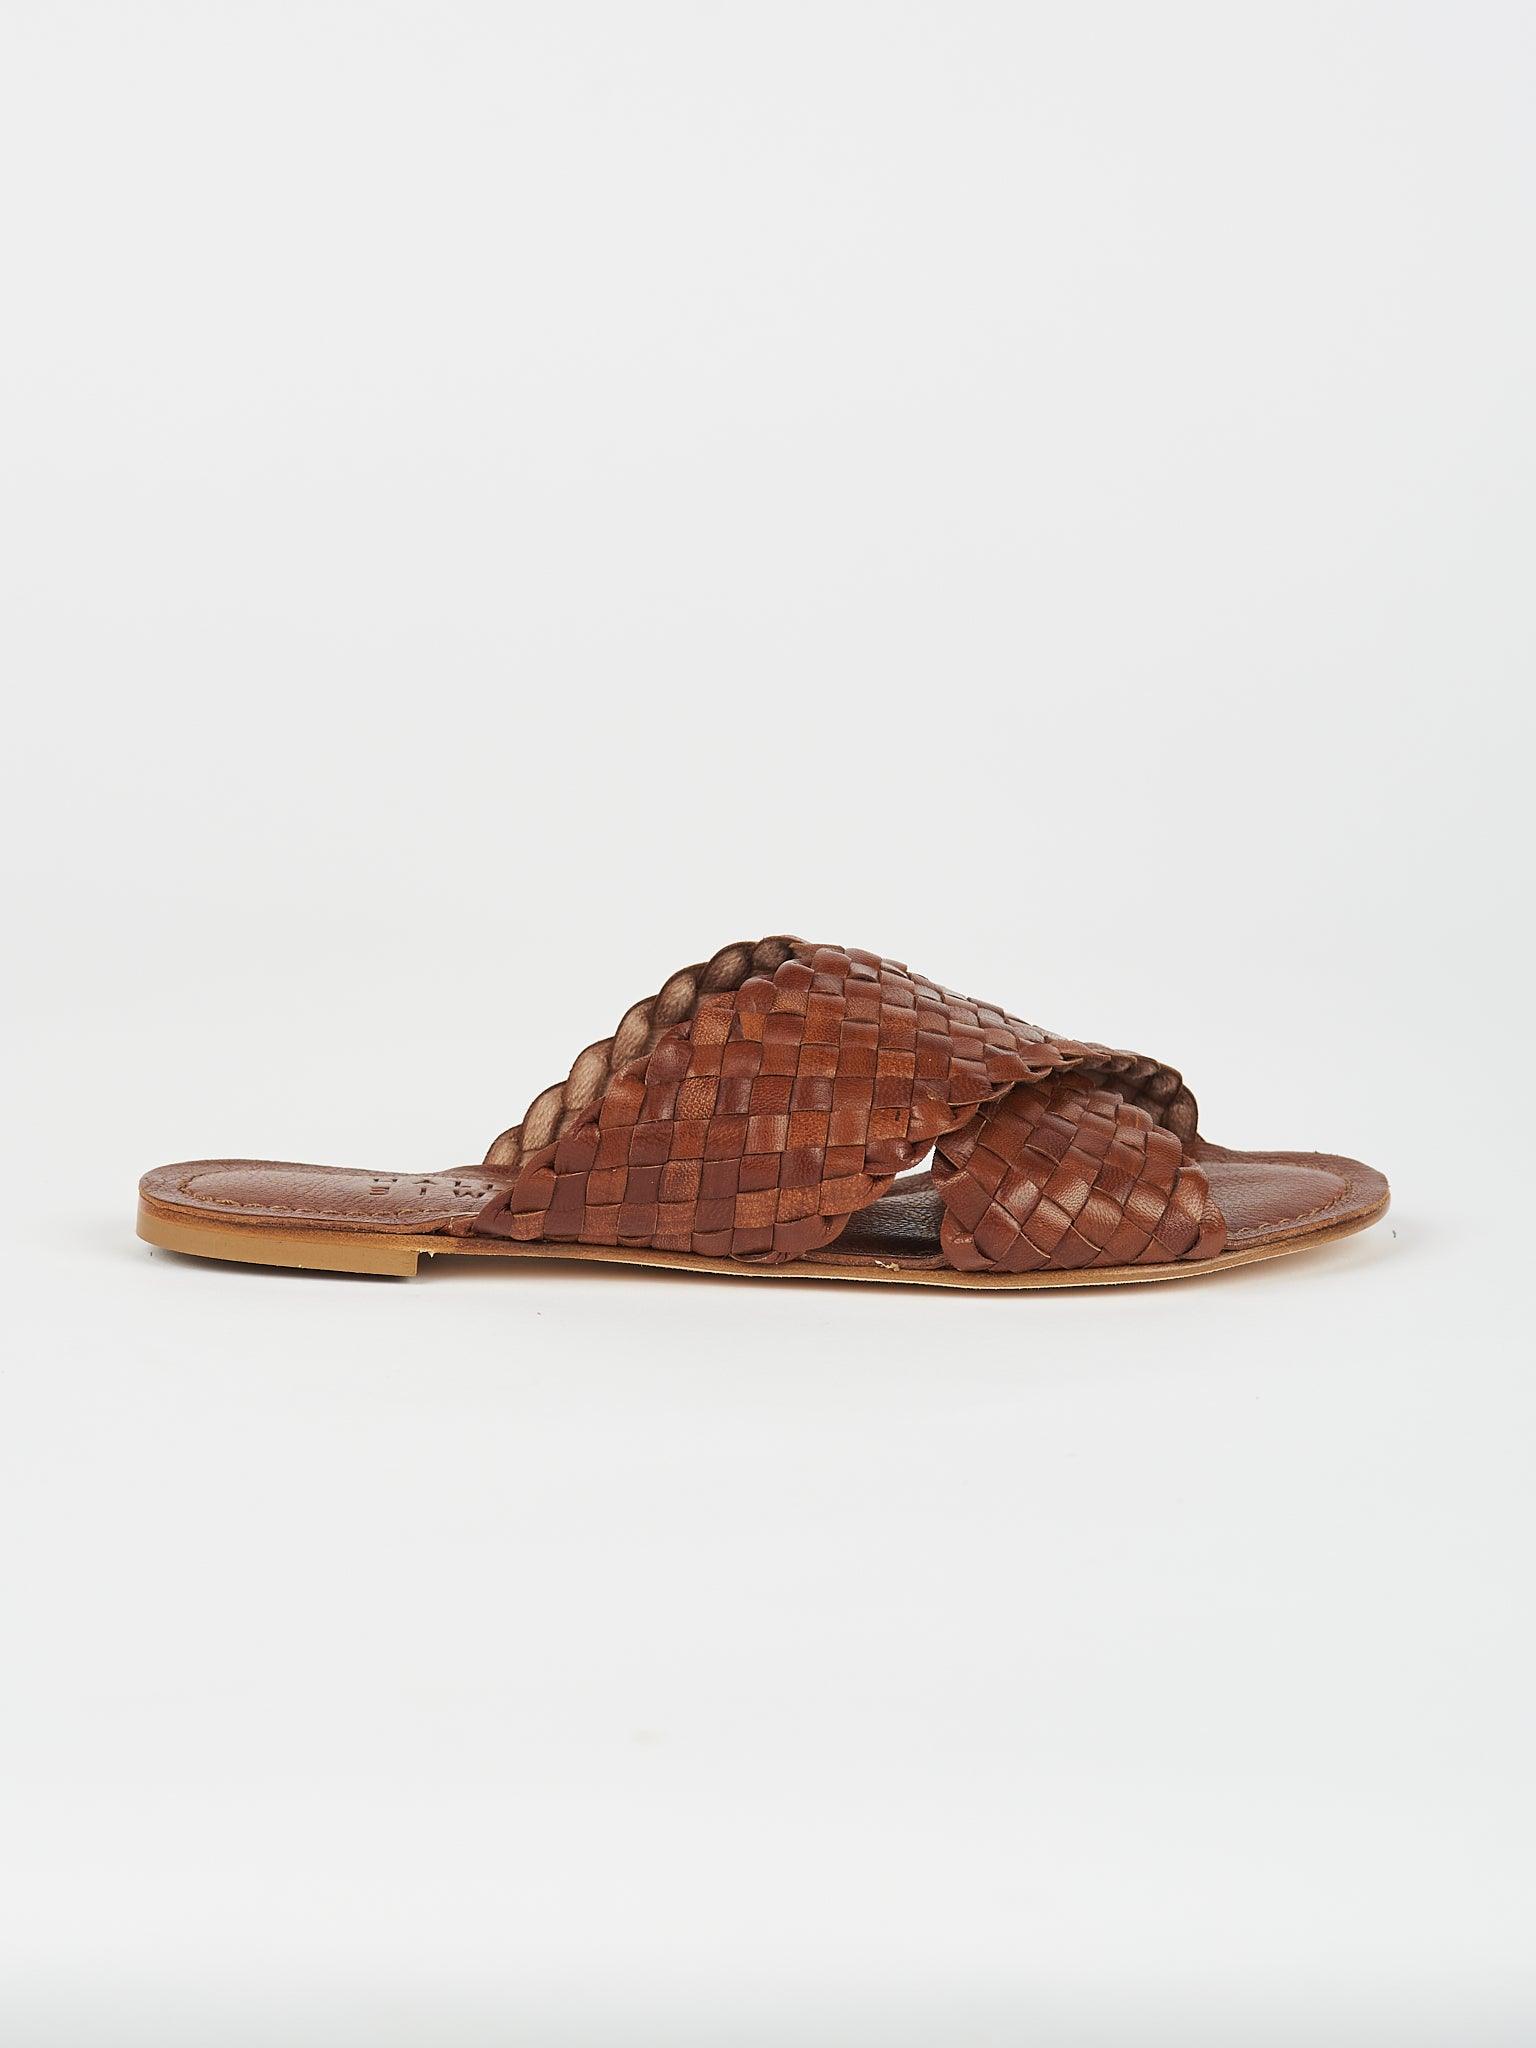 The Woven Strap Slide in Brown Side View